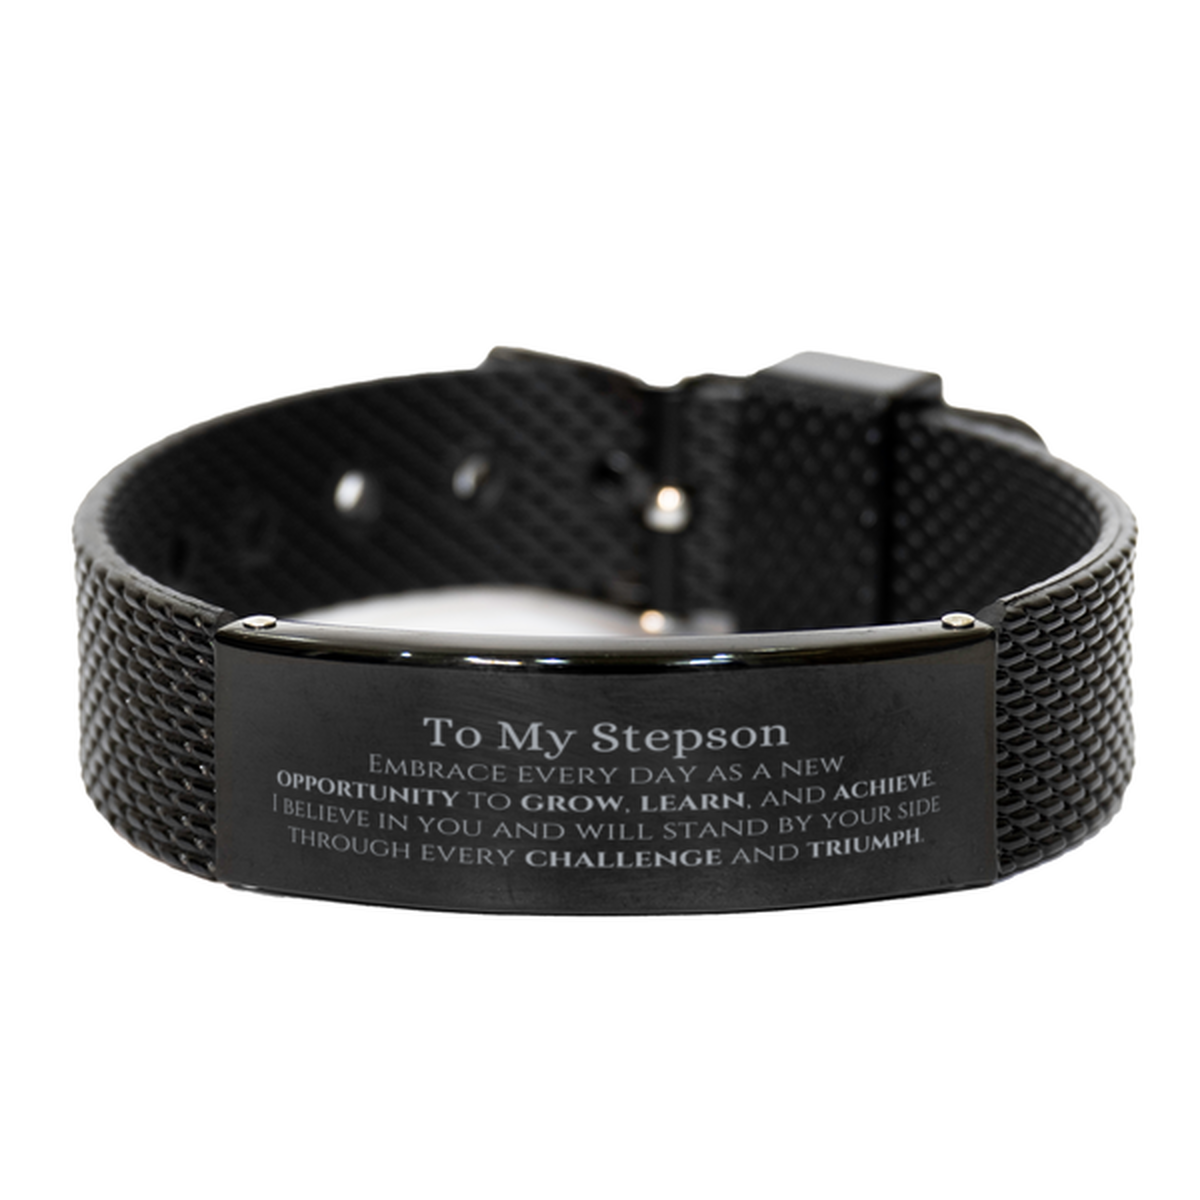 To My Stepson Gifts, I believe in you and will stand by your side, Inspirational Black Shark Mesh Bracelet For Stepson, Birthday Christmas Motivational Stepson Gifts